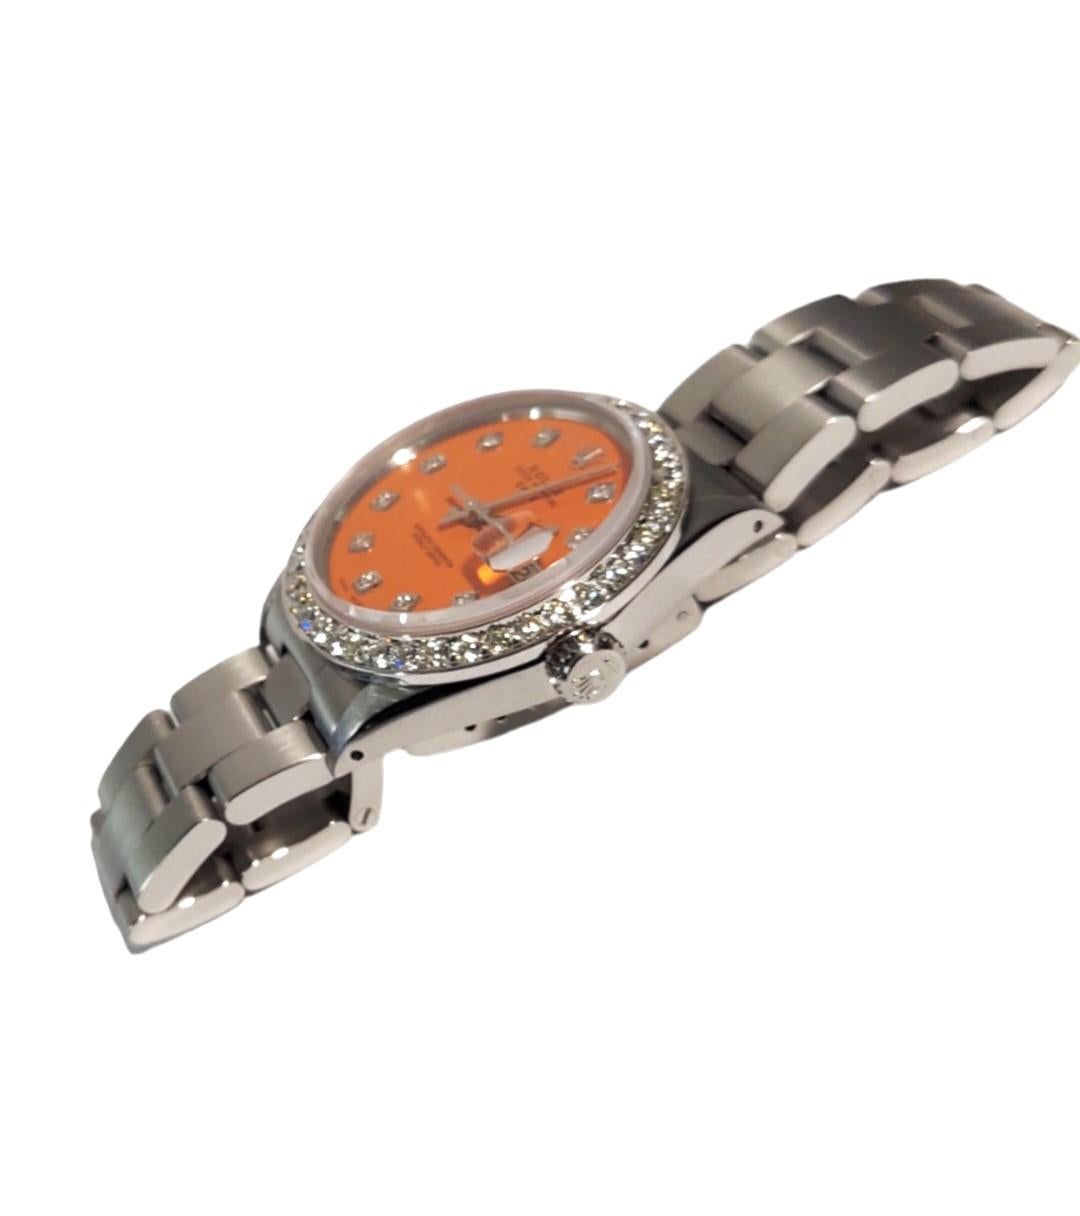 (Description)
Brand - Rolex
Model - 1500 
Style - Date
Metals - Stainless steel
Dial - Custom Matte Orange Diamond 
Bezel - Custom 1.0CT Diamond 
Crystal - sapphire 
Movement - Rolex auto CAL-1570 
Band - Stainless Steel Oyster

3 years In-House